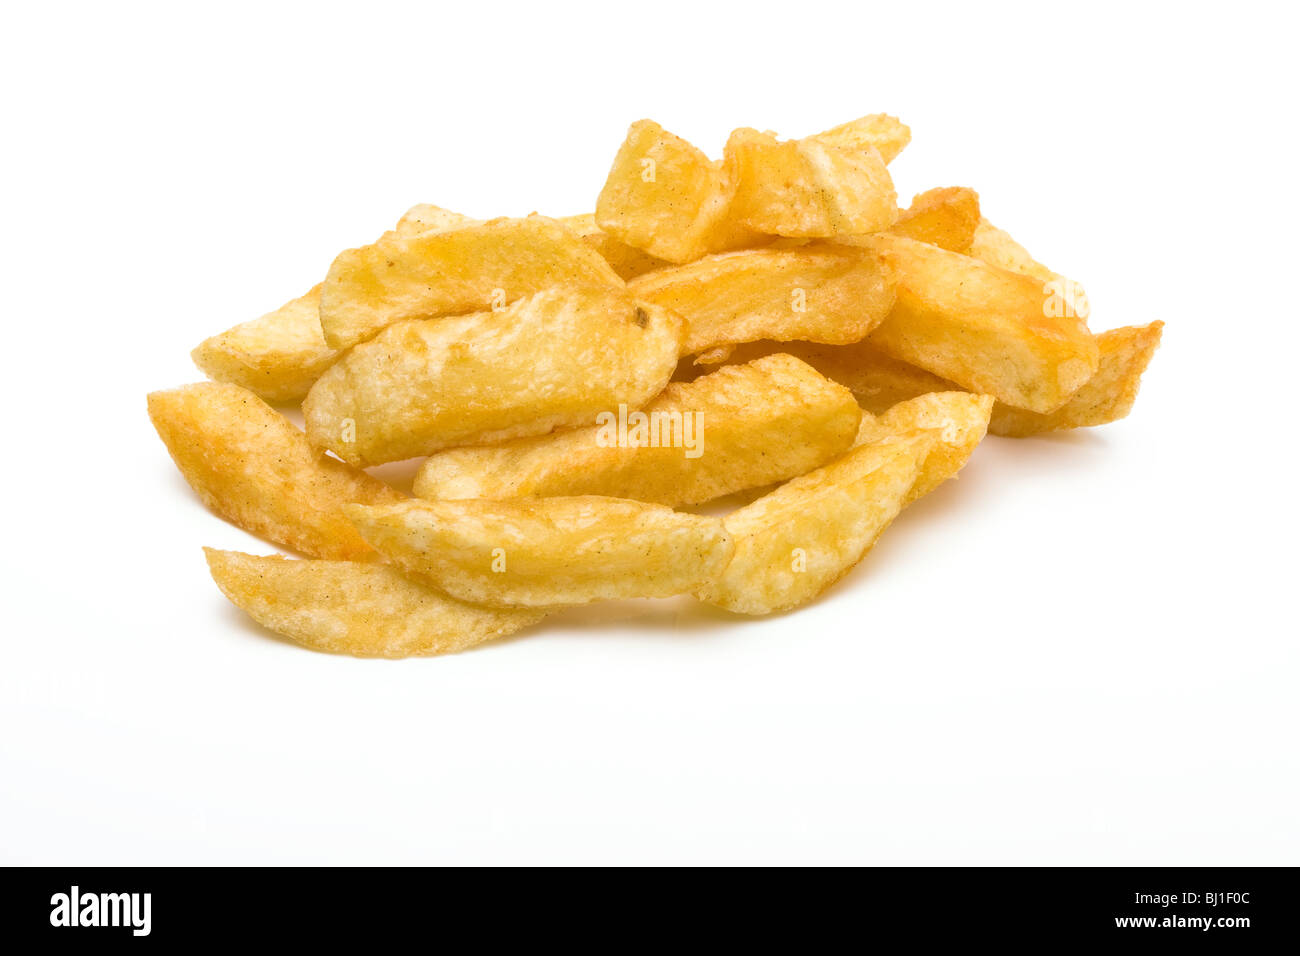 English Chip shop chips isolated against white background. Stock Photo